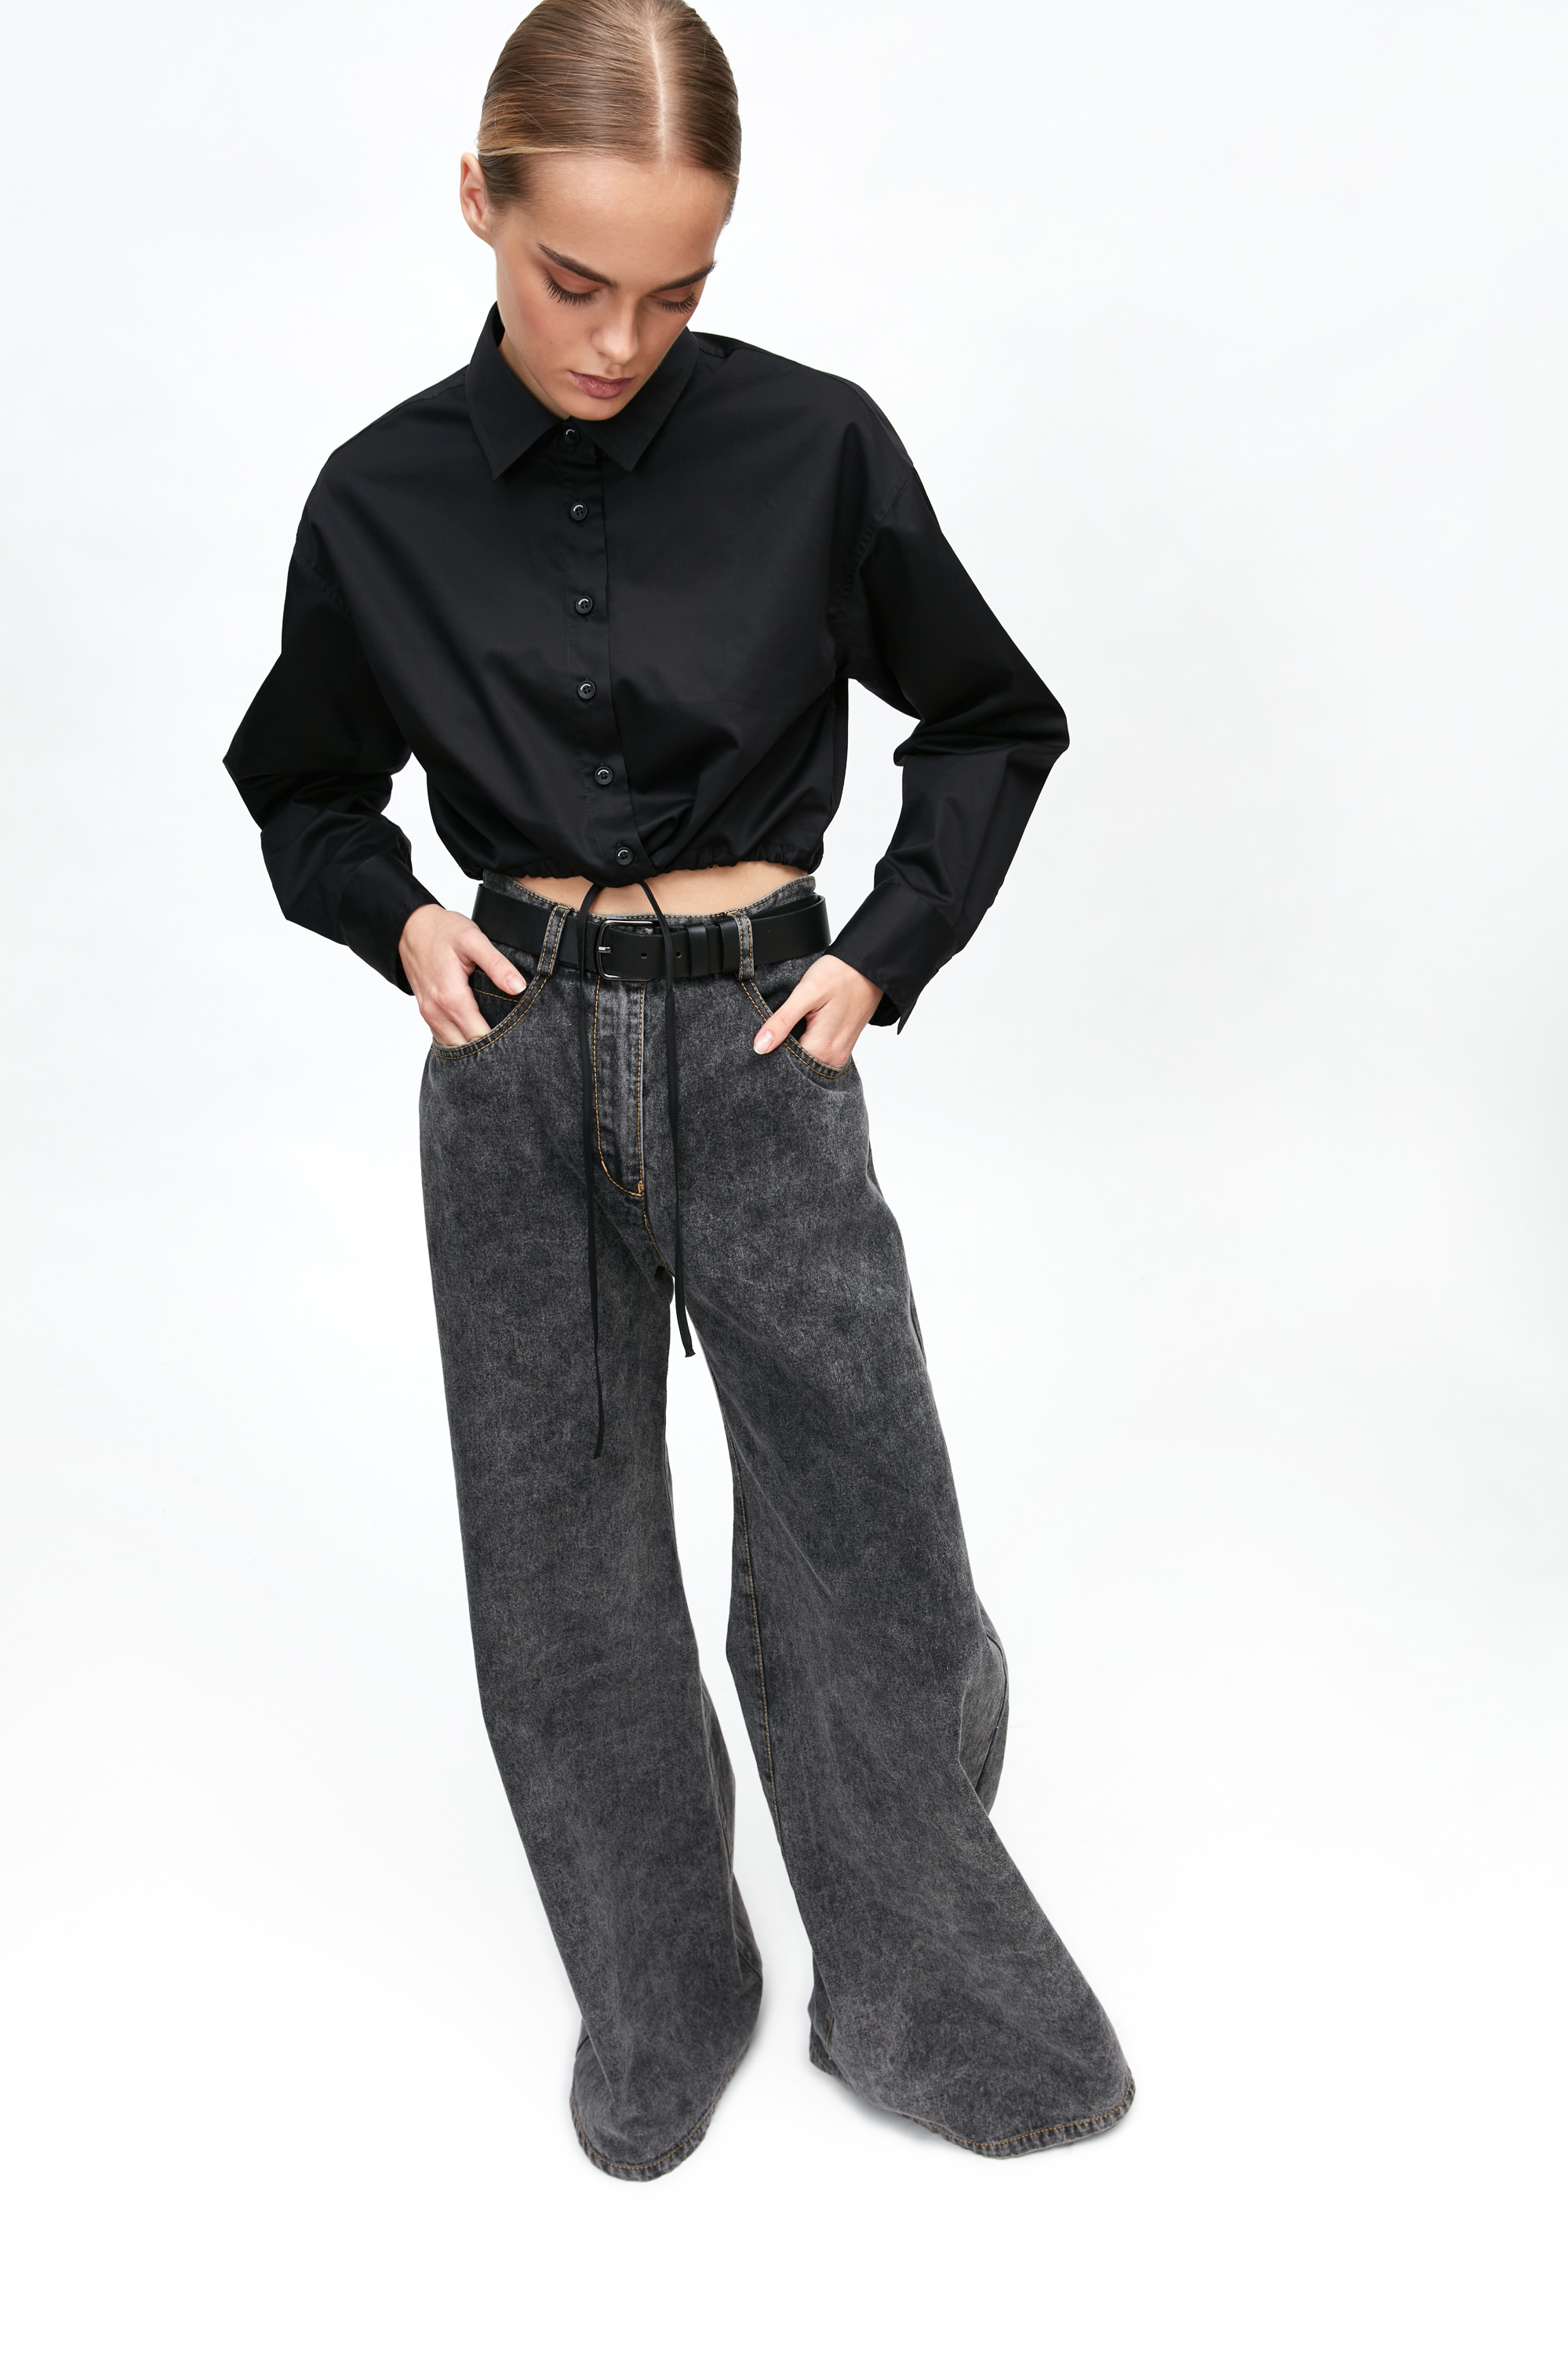 Trousers 3903-01 Black from BRUSNiKA